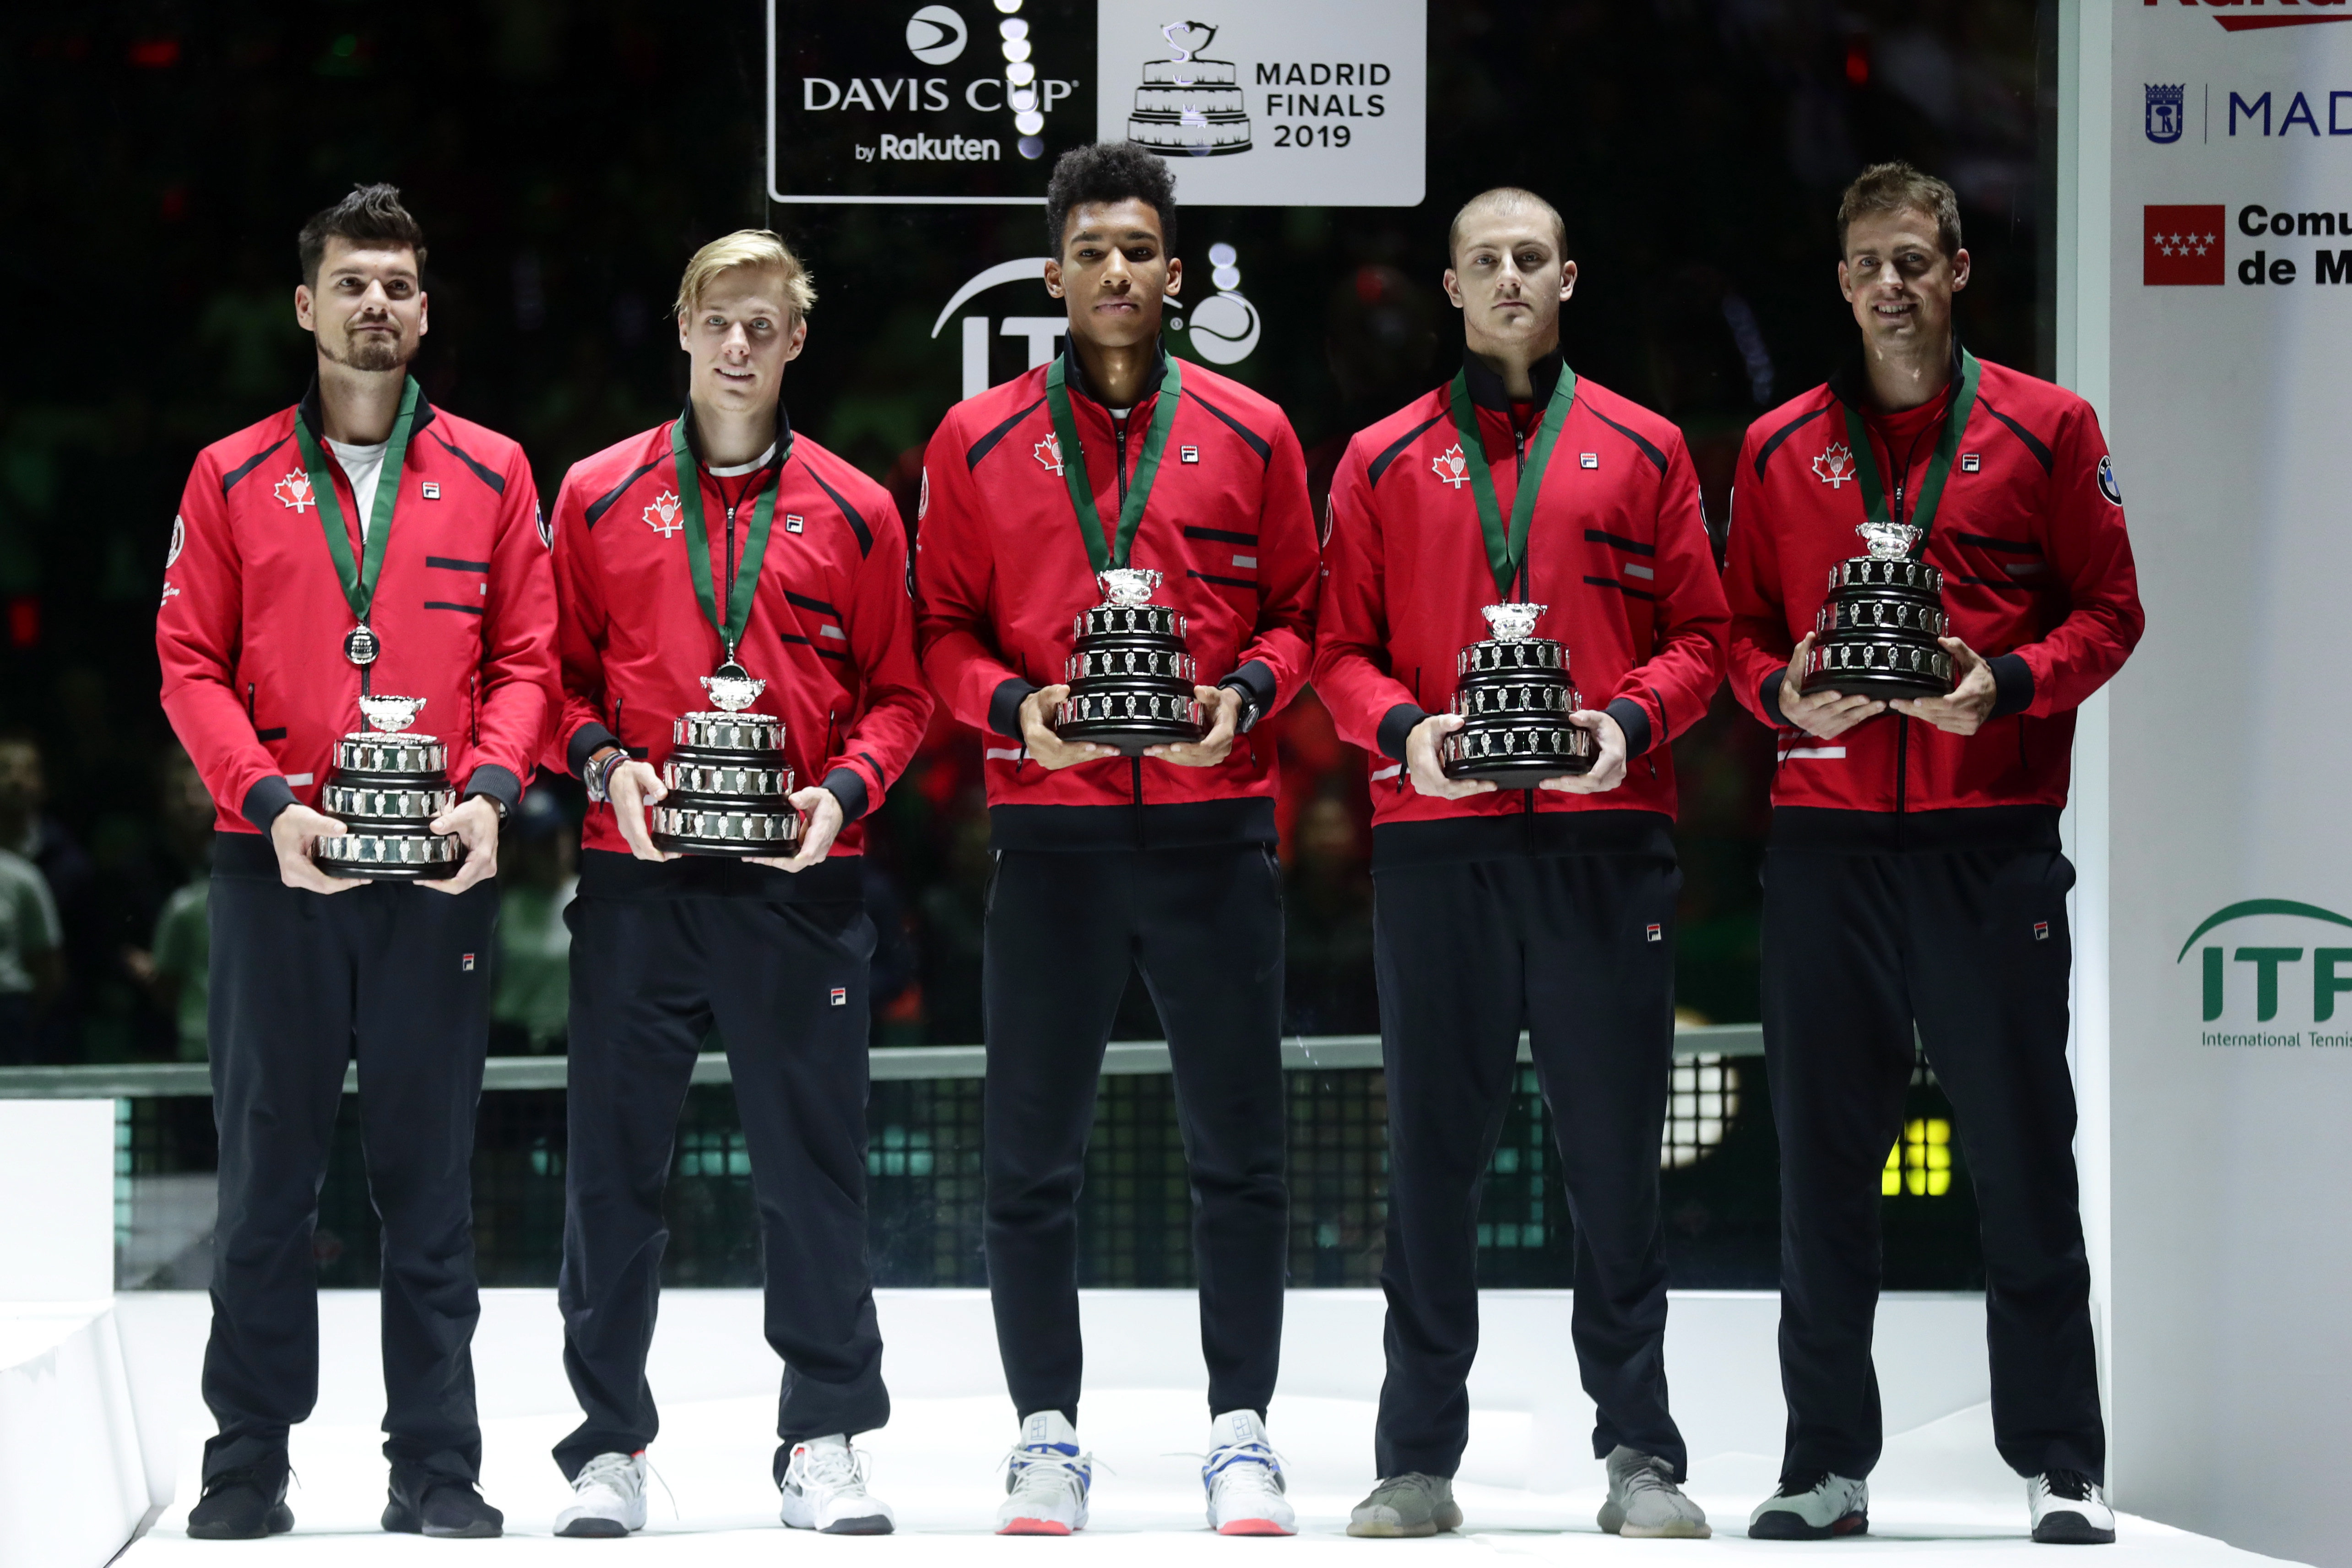 Weekend Roundup: Canada celebrates historic Davis Cup final and podium  finishes - Team Canada - Official Olympic Team Website